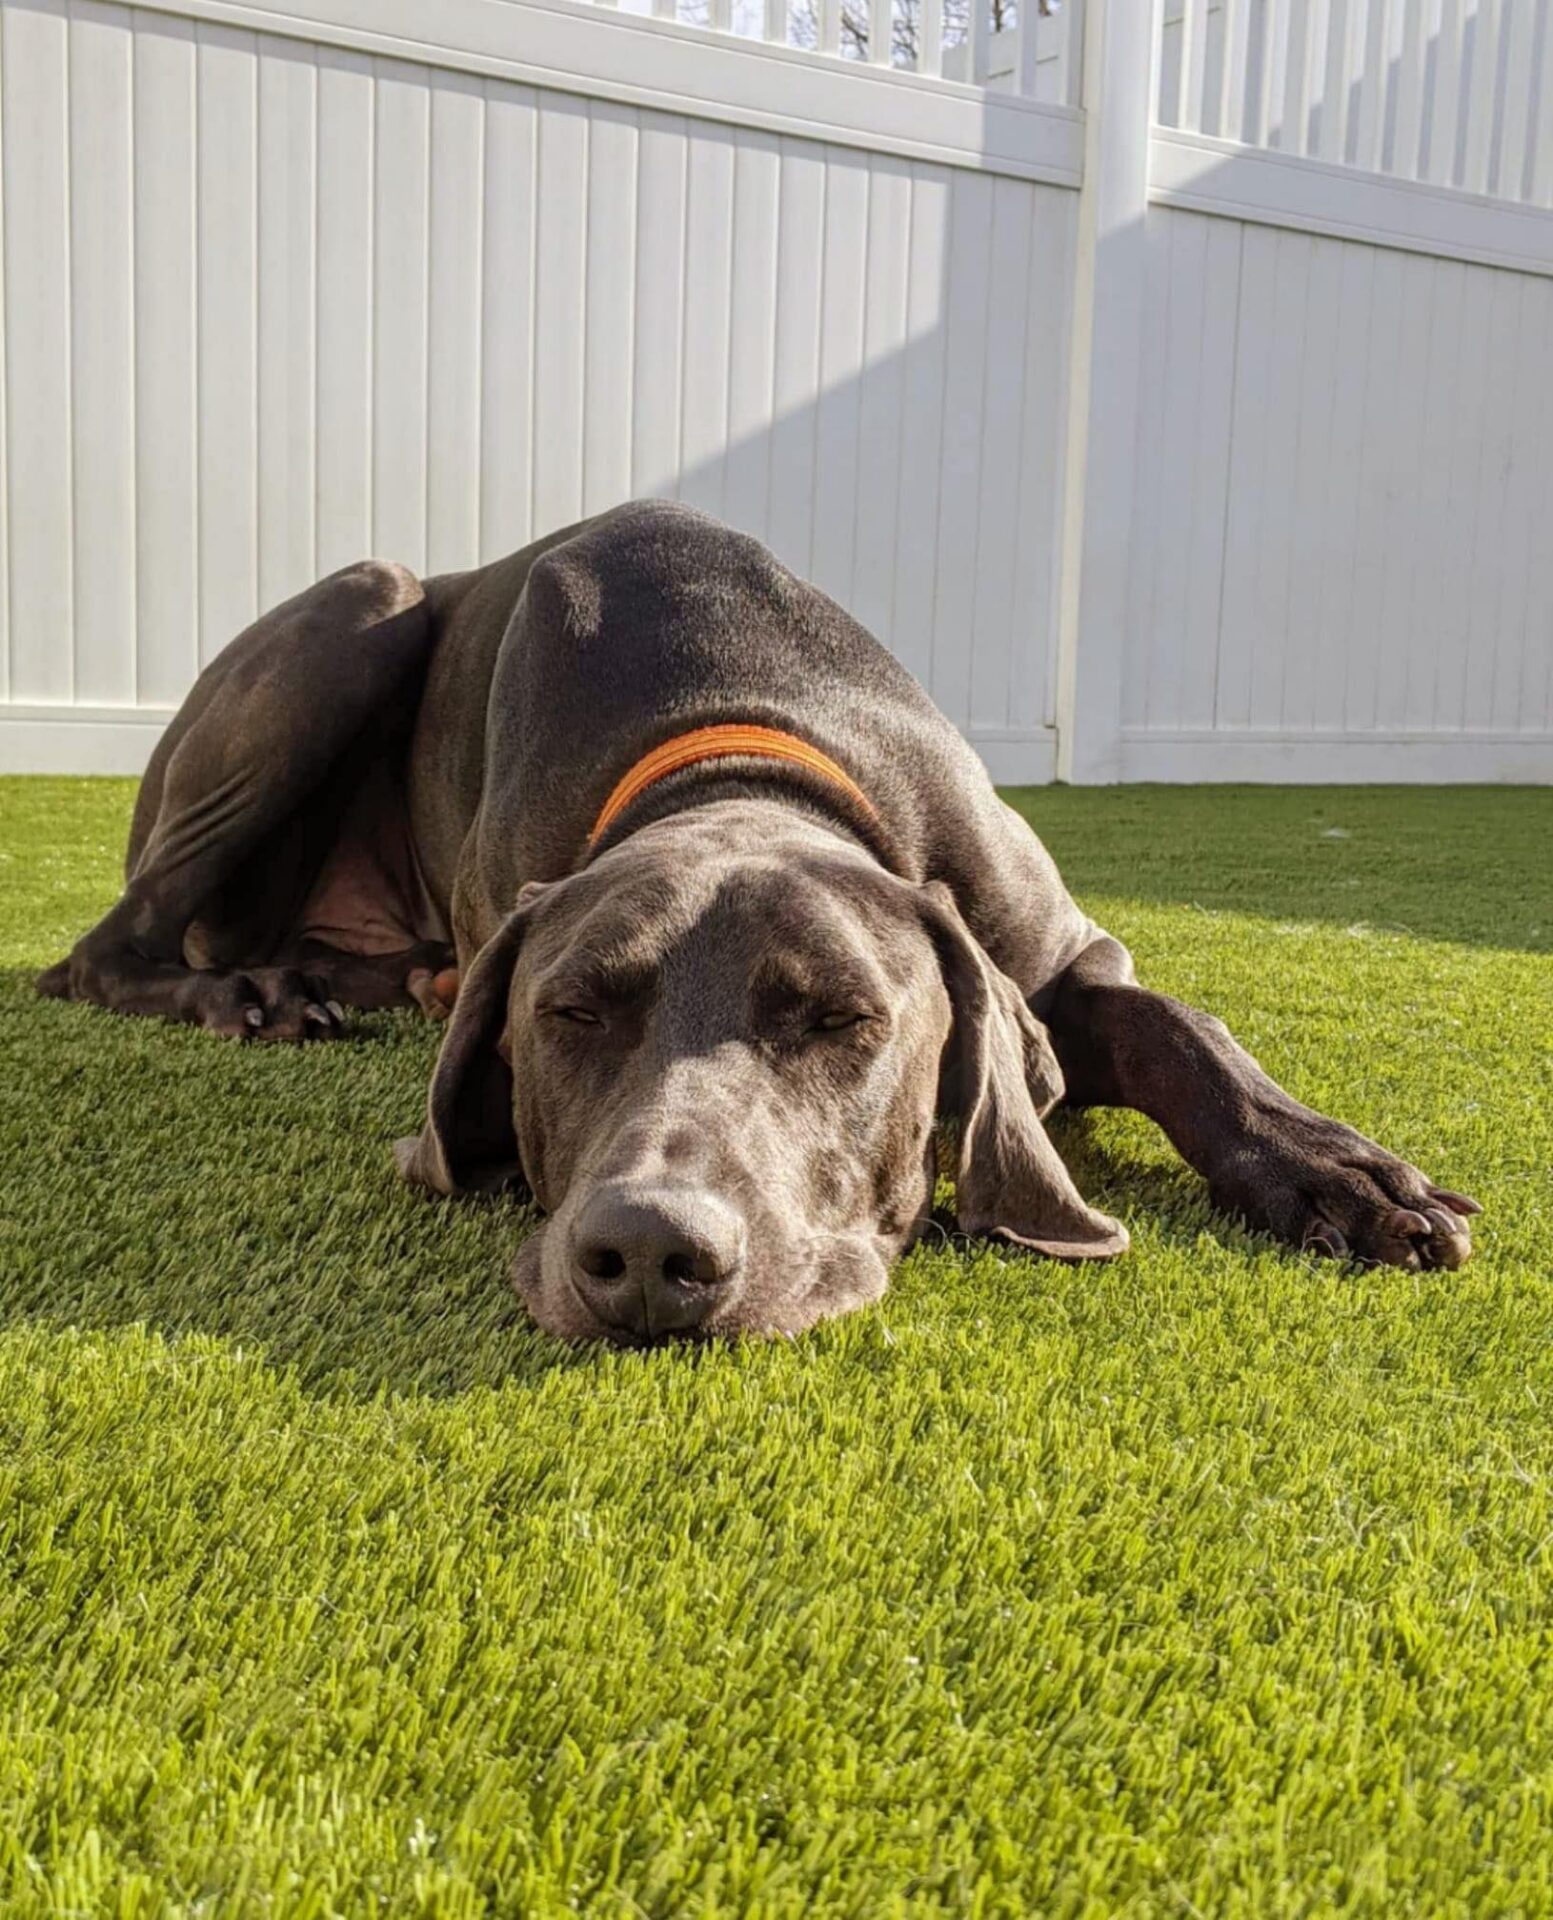 A large gray dog with a collar is lying down on green artificial grass, seemingly asleep, with white fencing in the background.